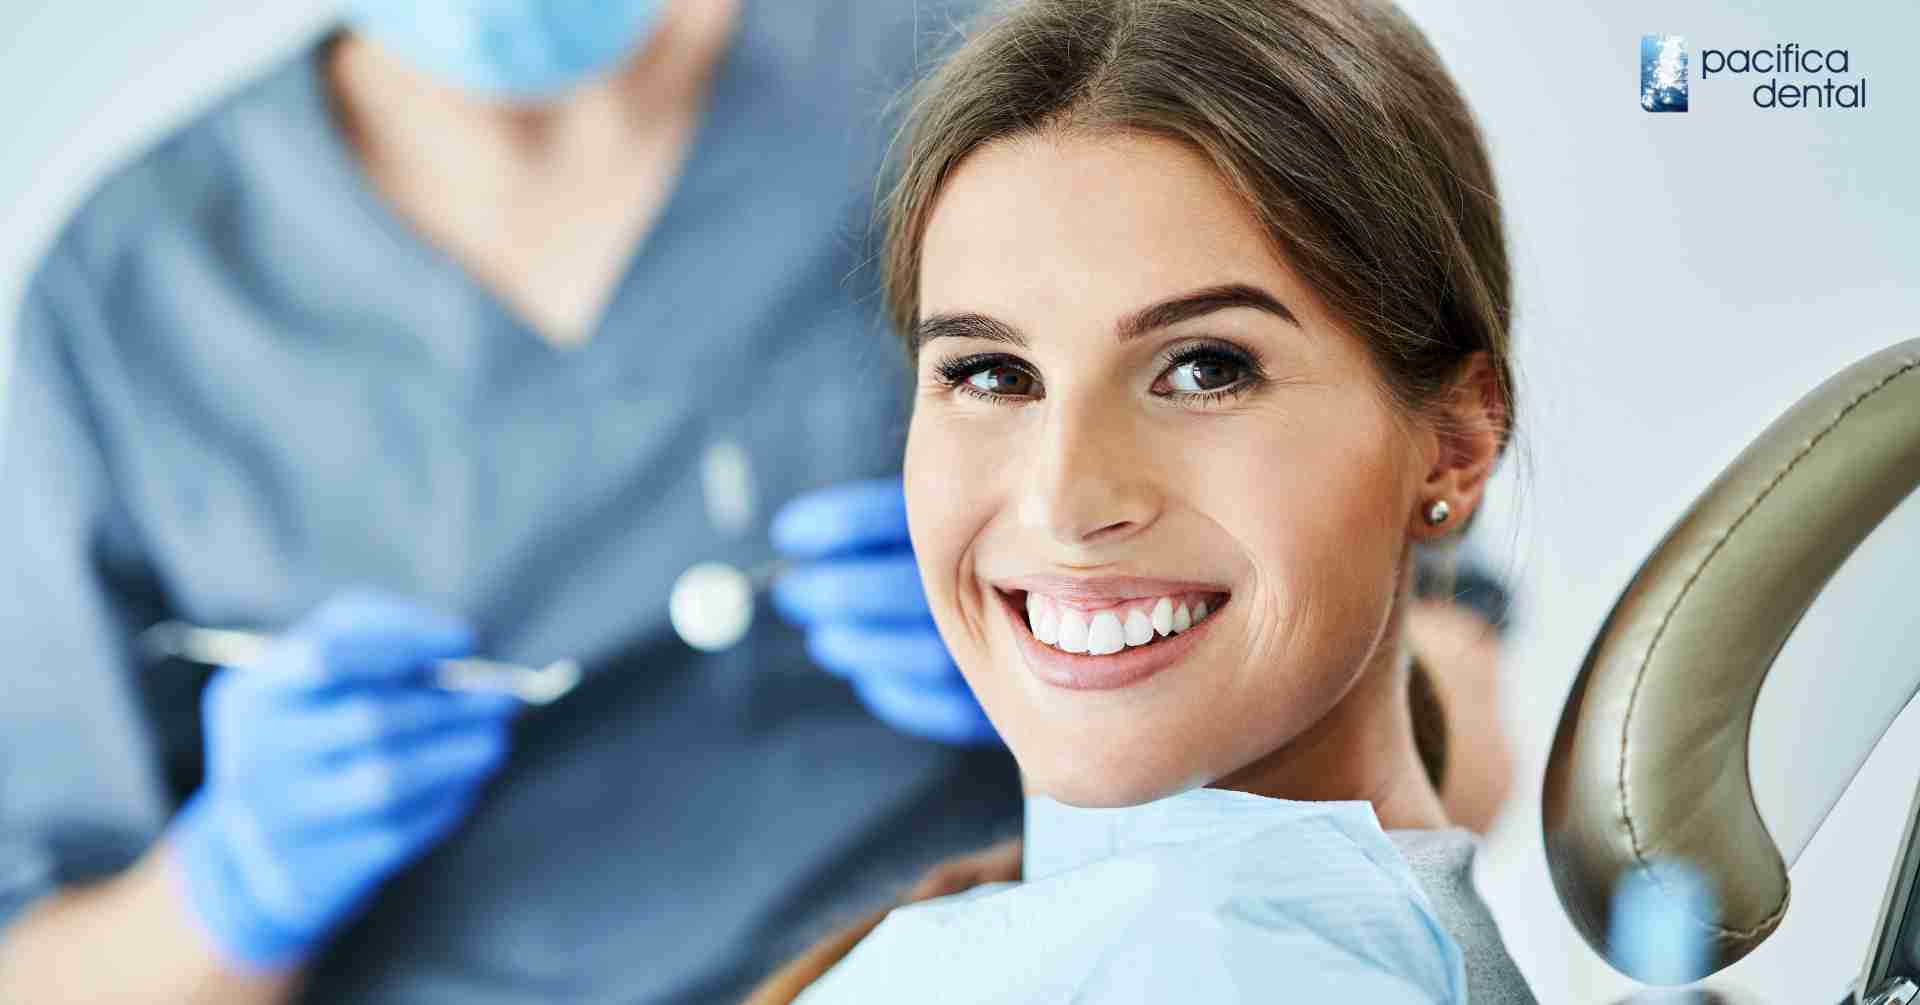 Dental IV Sedation. What Should You Expect